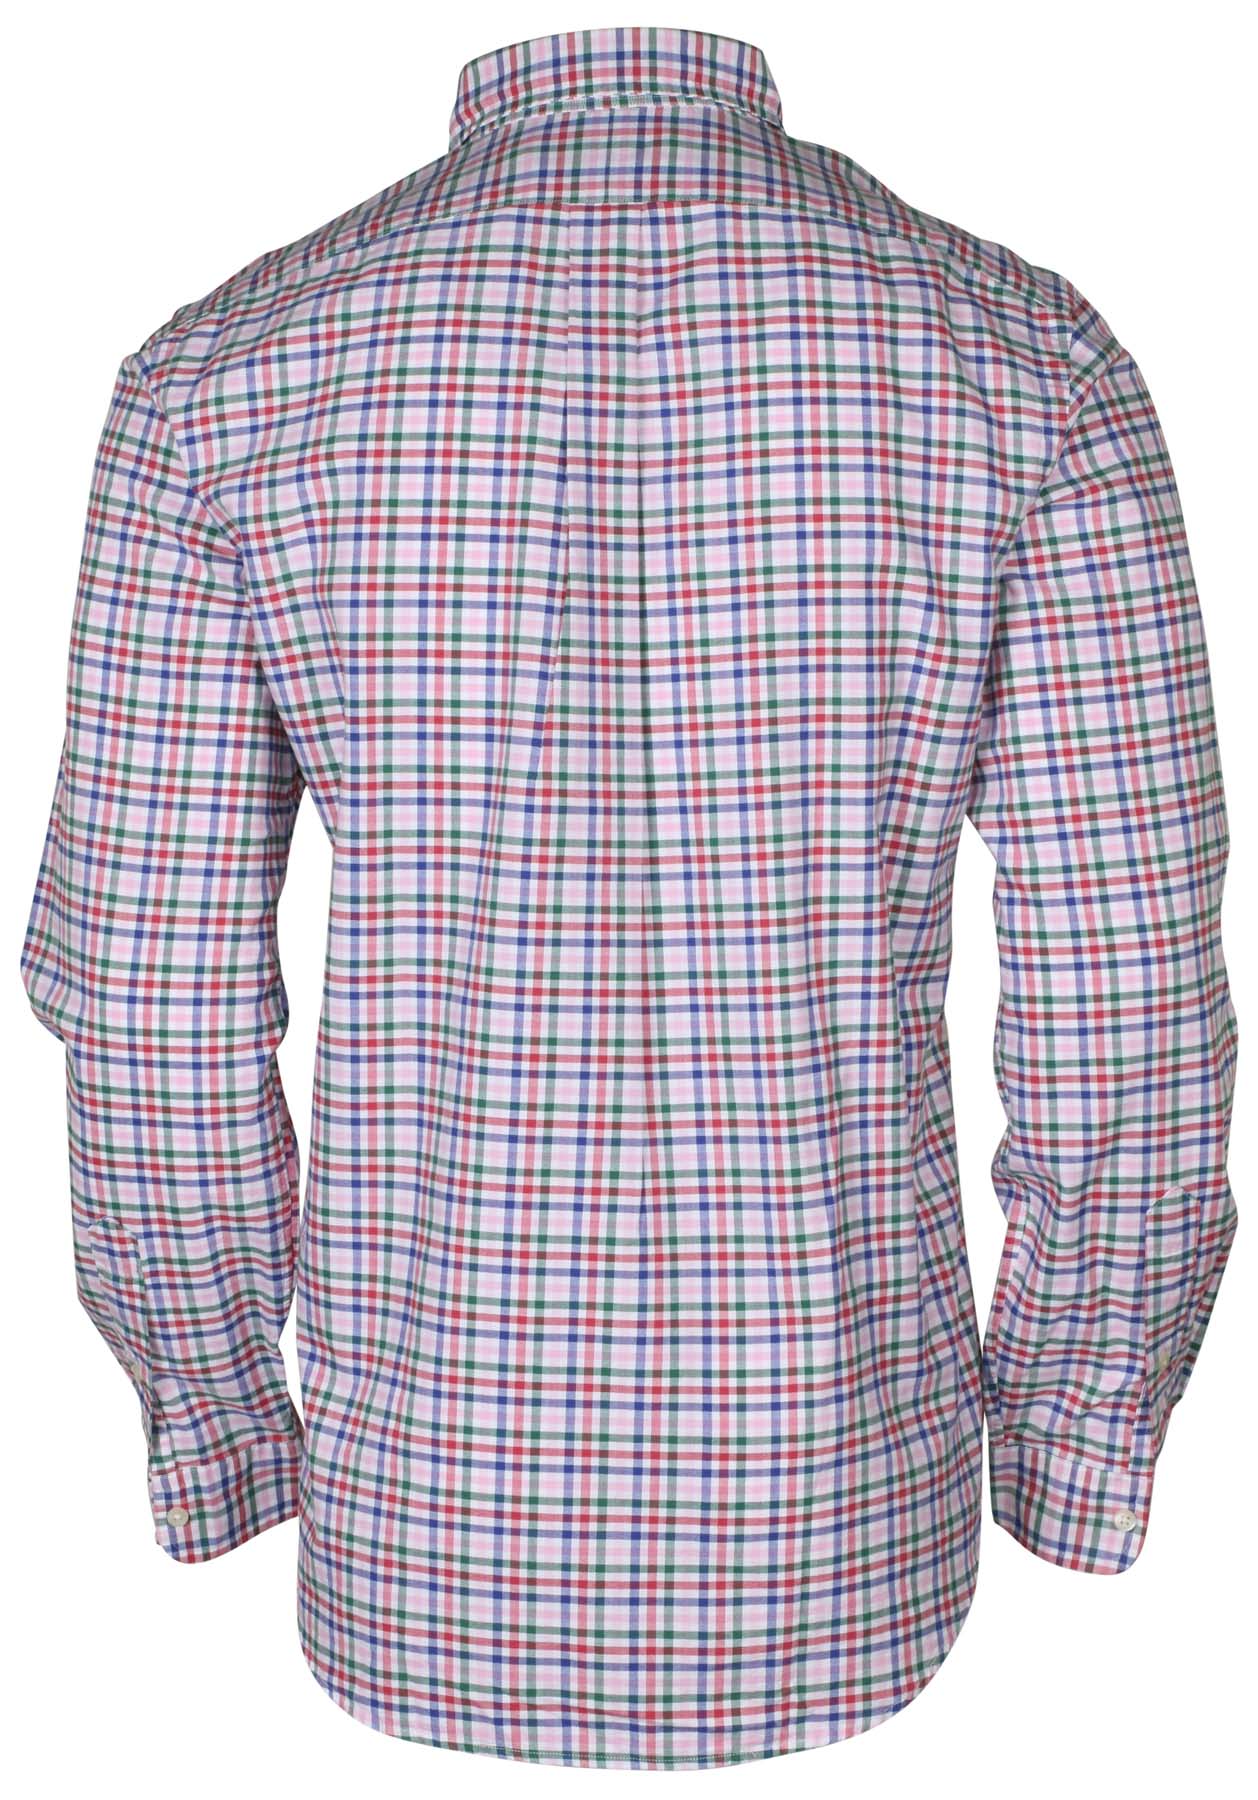 RL Men's Classic Fit Plaid Oxford Button Down Shirt (Small, Pink) - image 3 of 3